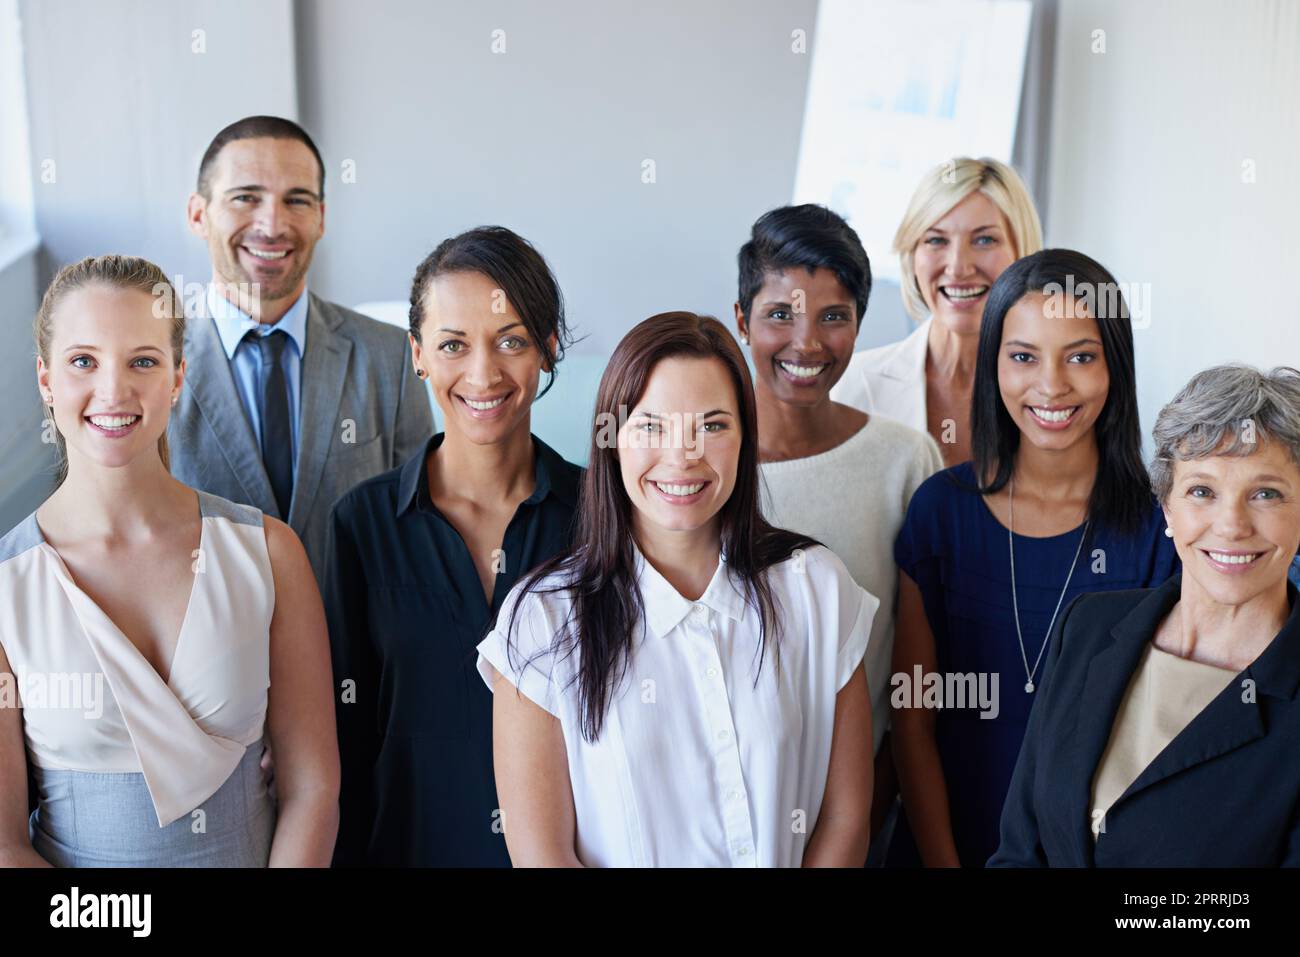 Teamwork makes the dream work. Portrait of a group of colleagues together. Stock Photo